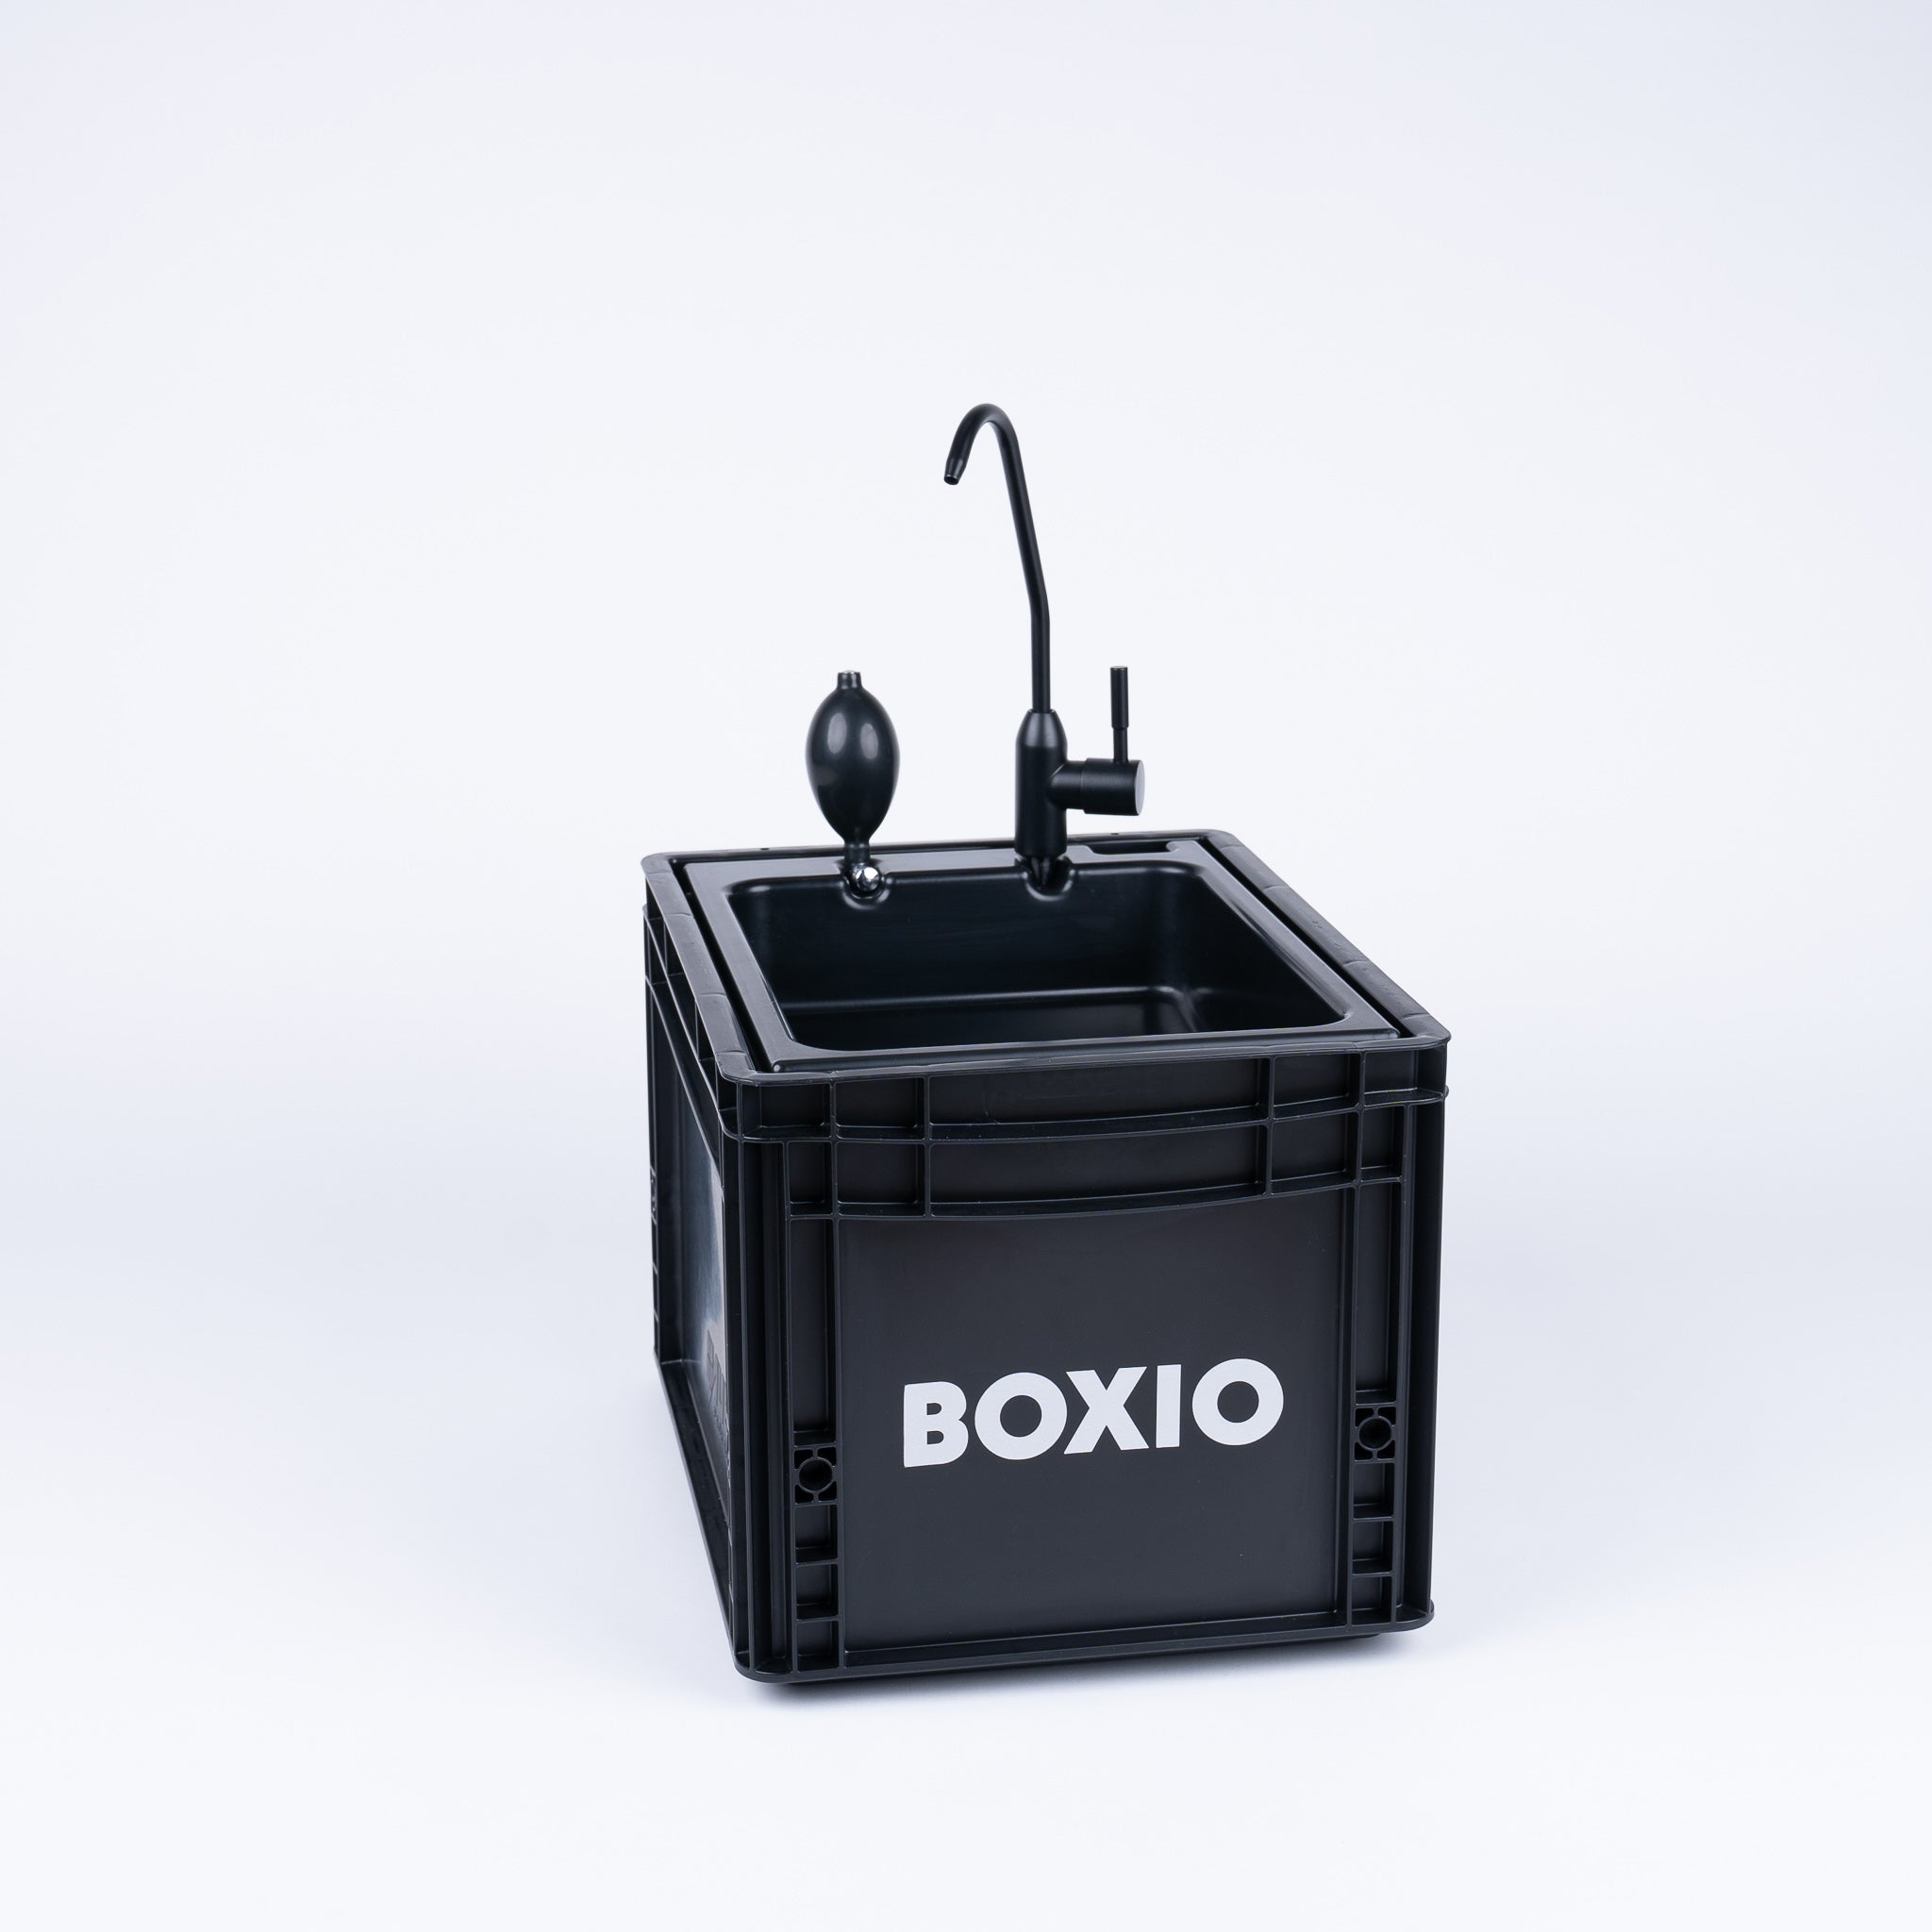 BOXIO SANITARY - All-in-one Bundle